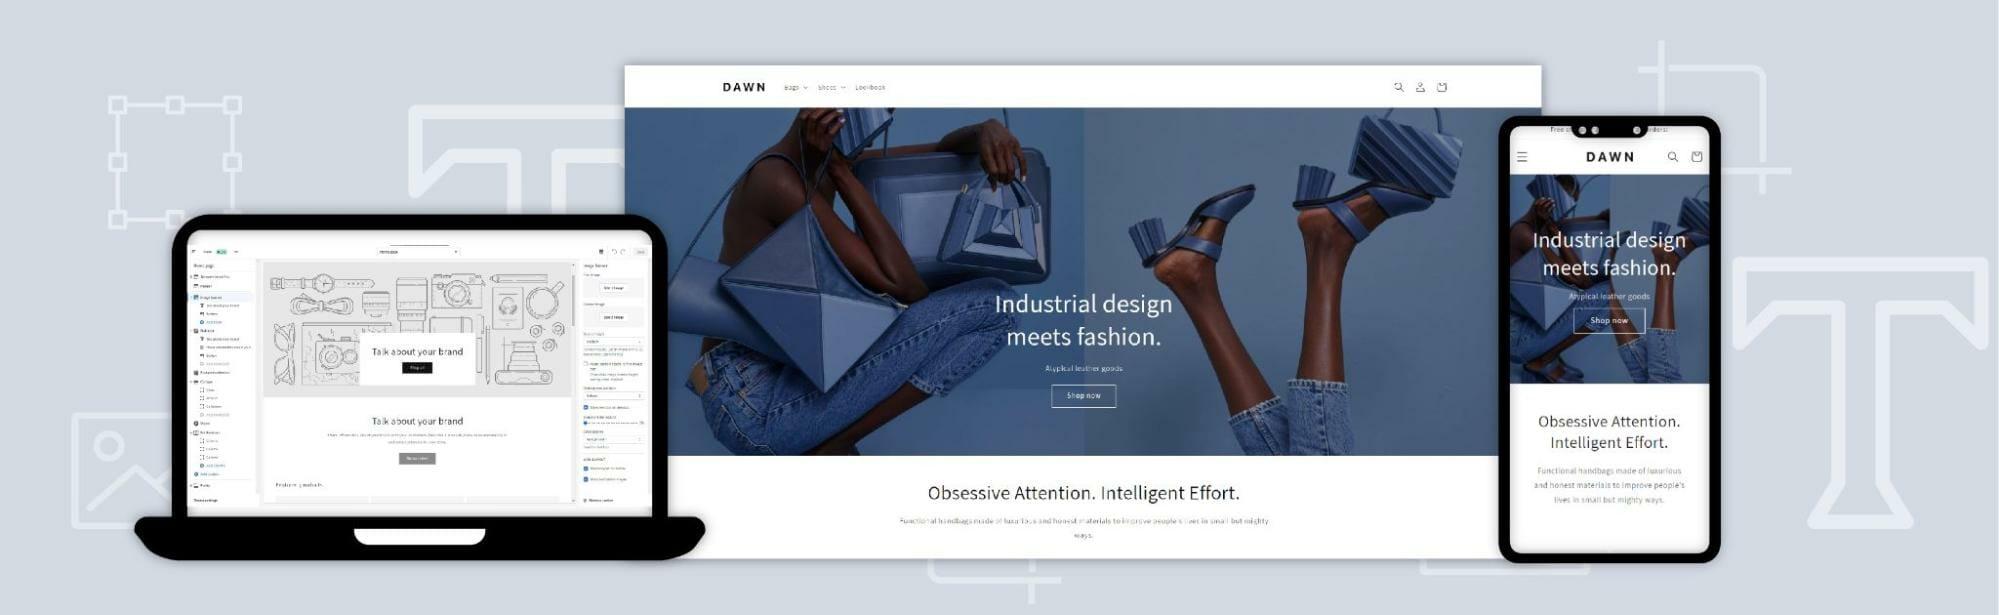 The Shopify Theme and Online Store Editor Explained